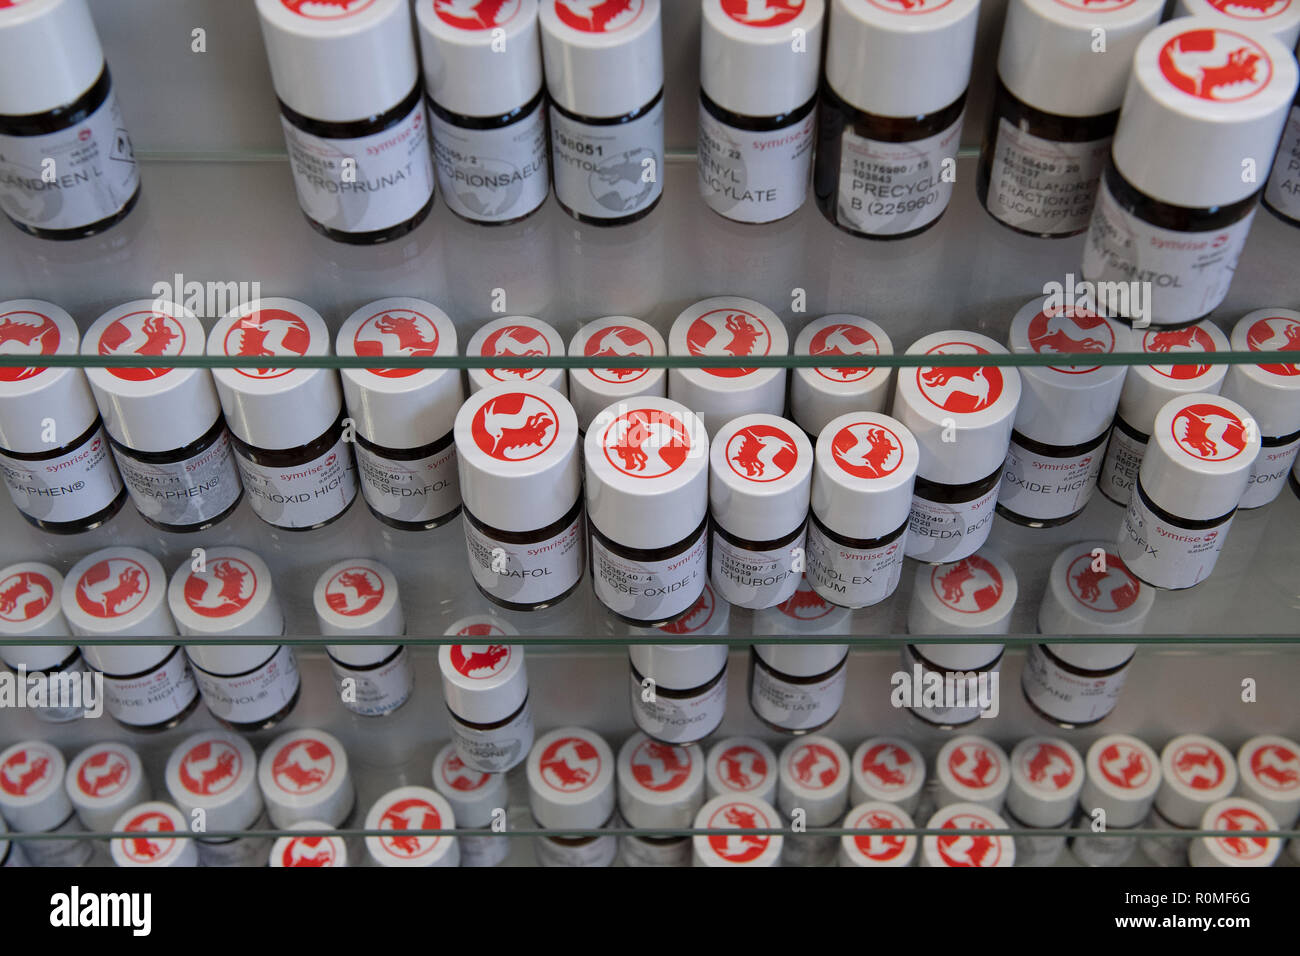 Holzminden, Germany. 23rd Oct, 2018. Fragrance raw materials in bottles with the Symrise AG logo are on a shelf. Symrise AG is one of the world's leading suppliers of fragrances and flavors. Credit: Swen Pförtner/dpa/Alamy Live News Stock Photo